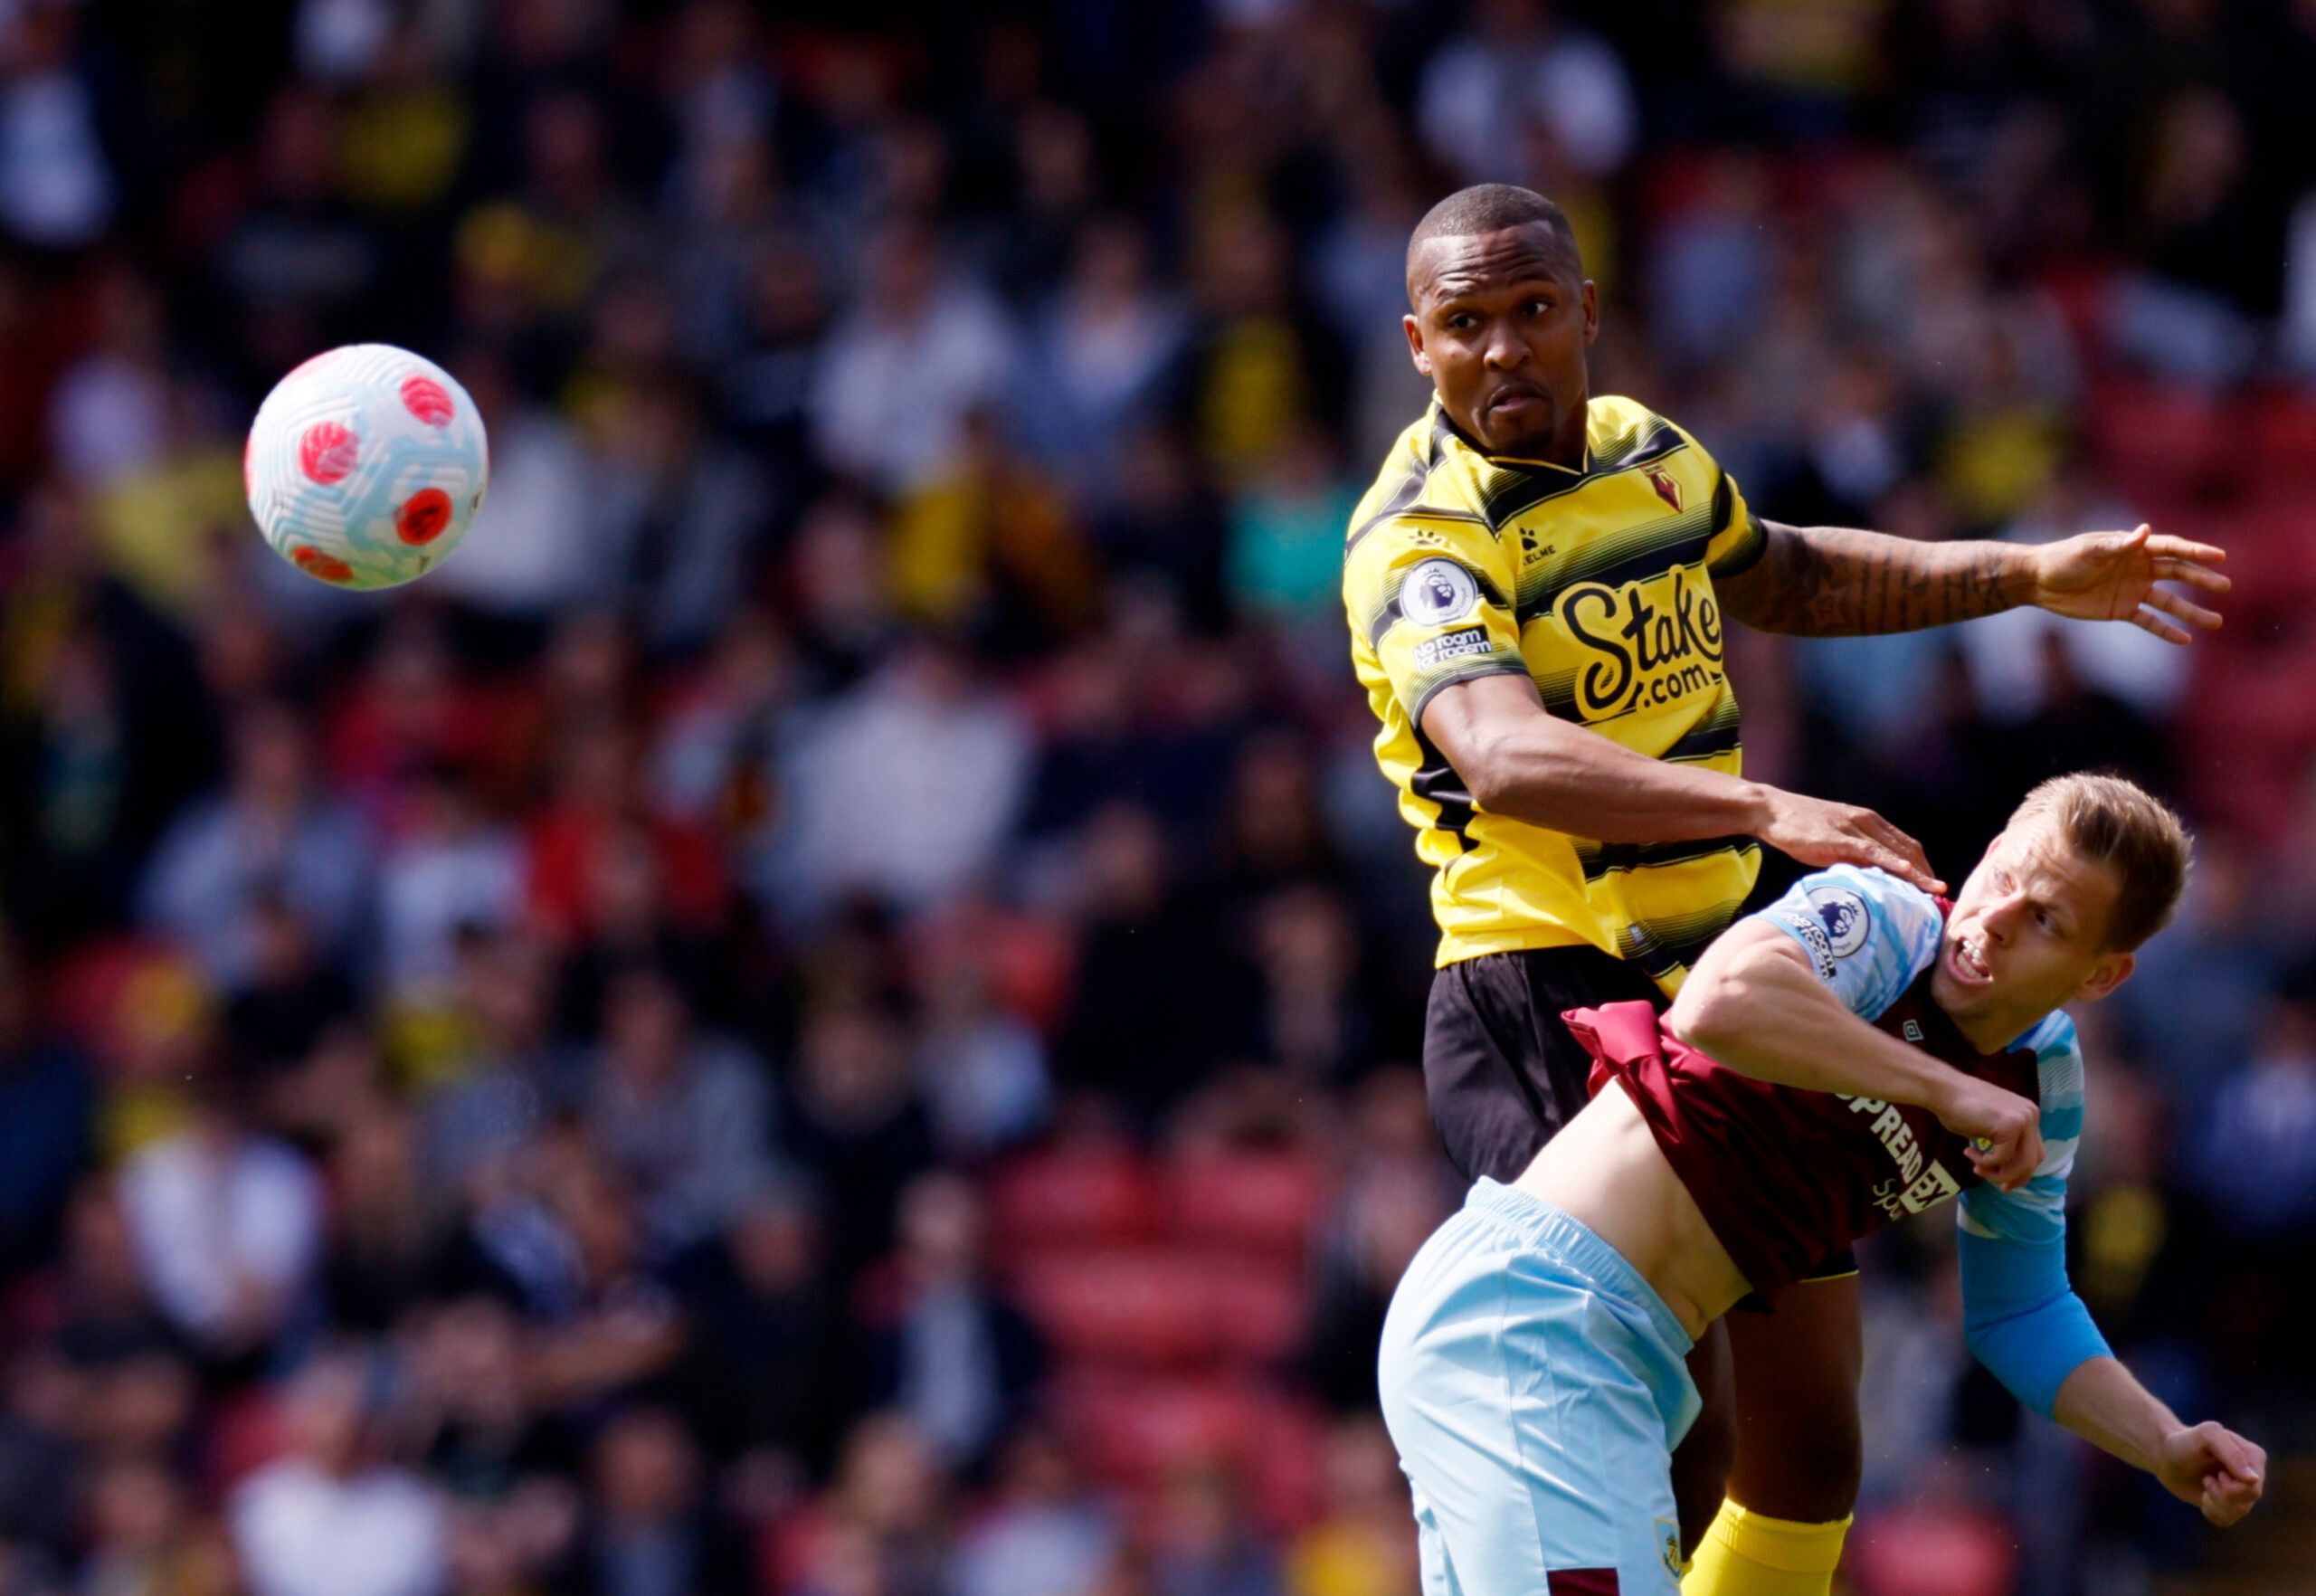 Soccer Football - Premier League - Watford v Burnley - Vicarage Road, Watford, Britain - April 30, 2022 Watford's Samir in action with Burnley's Matej Vydra Action Images via Reuters/Andrew Couldridge EDITORIAL USE ONLY. No use with unauthorized audio, video, data, fixture lists, club/league logos or 'live' services. Online in-match use limited to 75 images, no video emulation. No use in betting, games or single club /league/player publications.  Please contact your account representative for fu